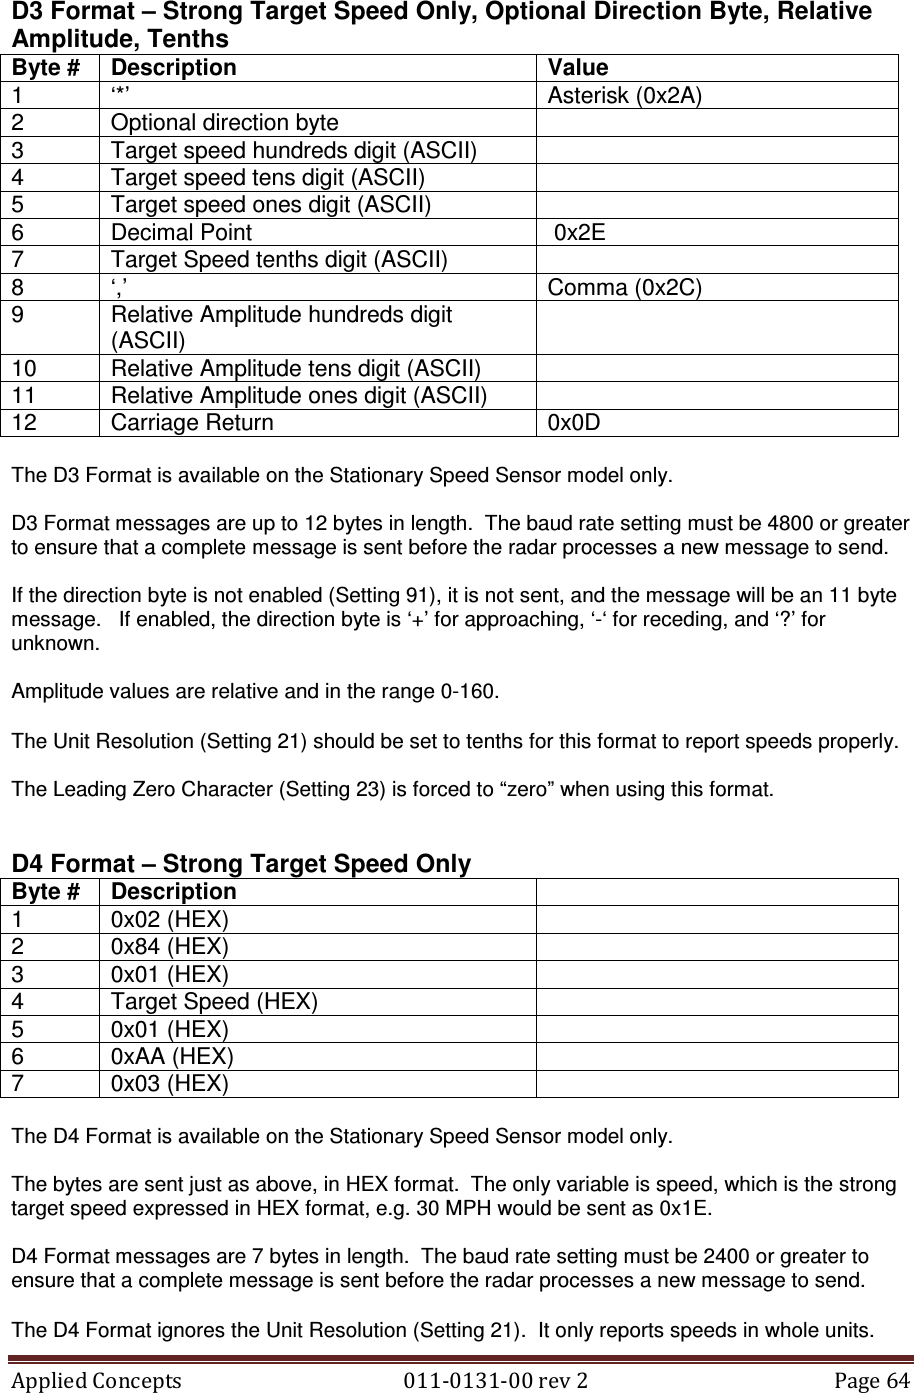 Applied Concepts                                            011-0131-00 rev 2  Page 64  D3 Format – Strong Target Speed Only, Optional Direction Byte, Relative Amplitude, Tenths Byte #  Description  Value 1  ‘*’  Asterisk (0x2A) 2  Optional direction byte   3  Target speed hundreds digit (ASCII)   4  Target speed tens digit (ASCII)   5  Target speed ones digit (ASCII)   6  Decimal Point   0x2E 7  Target Speed tenths digit (ASCII)   8  ‘,’  Comma (0x2C) 9  Relative Amplitude hundreds digit (ASCII)  10  Relative Amplitude tens digit (ASCII)   11  Relative Amplitude ones digit (ASCII)   12  Carriage Return  0x0D  The D3 Format is available on the Stationary Speed Sensor model only.  D3 Format messages are up to 12 bytes in length.  The baud rate setting must be 4800 or greater to ensure that a complete message is sent before the radar processes a new message to send.  If the direction byte is not enabled (Setting 91), it is not sent, and the message will be an 11 byte message.   If enabled, the direction byte is ‘+’ for approaching, ‘-‘ for receding, and ‘?’ for unknown.  Amplitude values are relative and in the range 0-160.  The Unit Resolution (Setting 21) should be set to tenths for this format to report speeds properly.  The Leading Zero Character (Setting 23) is forced to “zero” when using this format.   D4 Format – Strong Target Speed Only Byte #  Description   1  0x02 (HEX)   2  0x84 (HEX)   3  0x01 (HEX)   4  Target Speed (HEX)   5  0x01 (HEX)   6  0xAA (HEX)    7  0x03 (HEX)    The D4 Format is available on the Stationary Speed Sensor model only.  The bytes are sent just as above, in HEX format.  The only variable is speed, which is the strong target speed expressed in HEX format, e.g. 30 MPH would be sent as 0x1E.  D4 Format messages are 7 bytes in length.  The baud rate setting must be 2400 or greater to ensure that a complete message is sent before the radar processes a new message to send.  The D4 Format ignores the Unit Resolution (Setting 21).  It only reports speeds in whole units. 